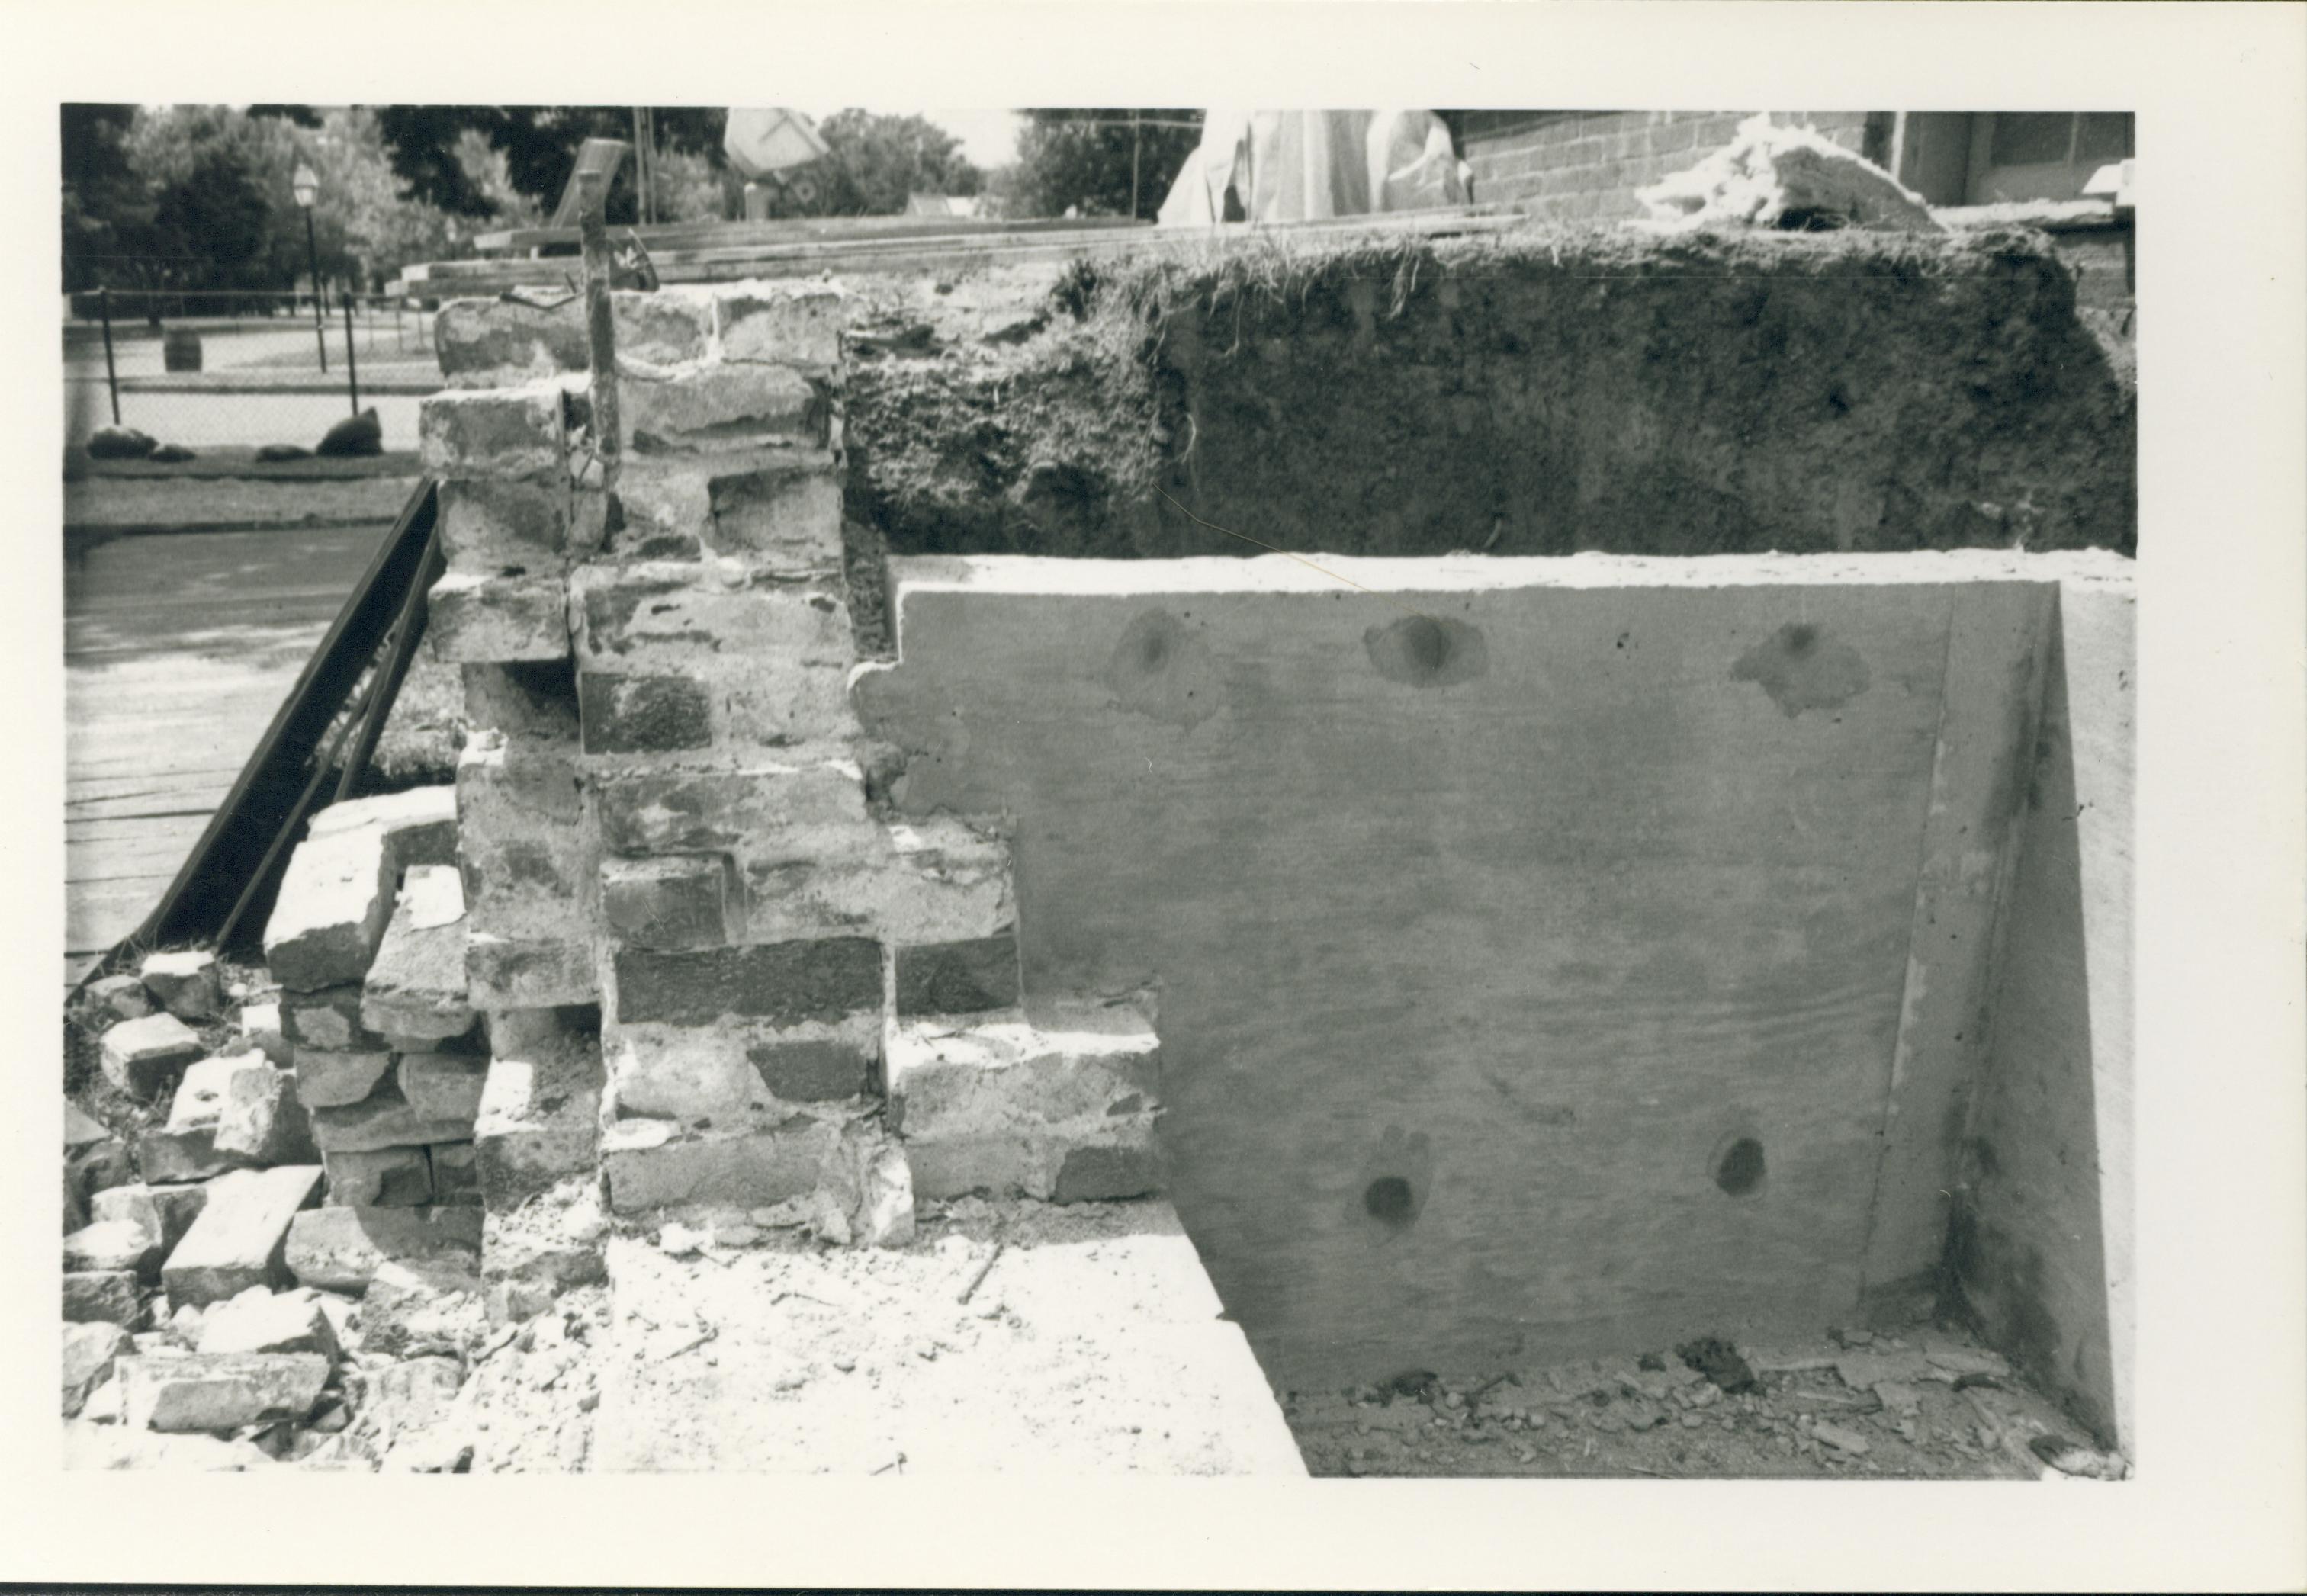 South face of Lincoln Home retaining wall and section of south yard during the 1987-1988 Restoration. A section of the foundation, boardwalk, and Eighth Street can be seen. Photographer facing west.